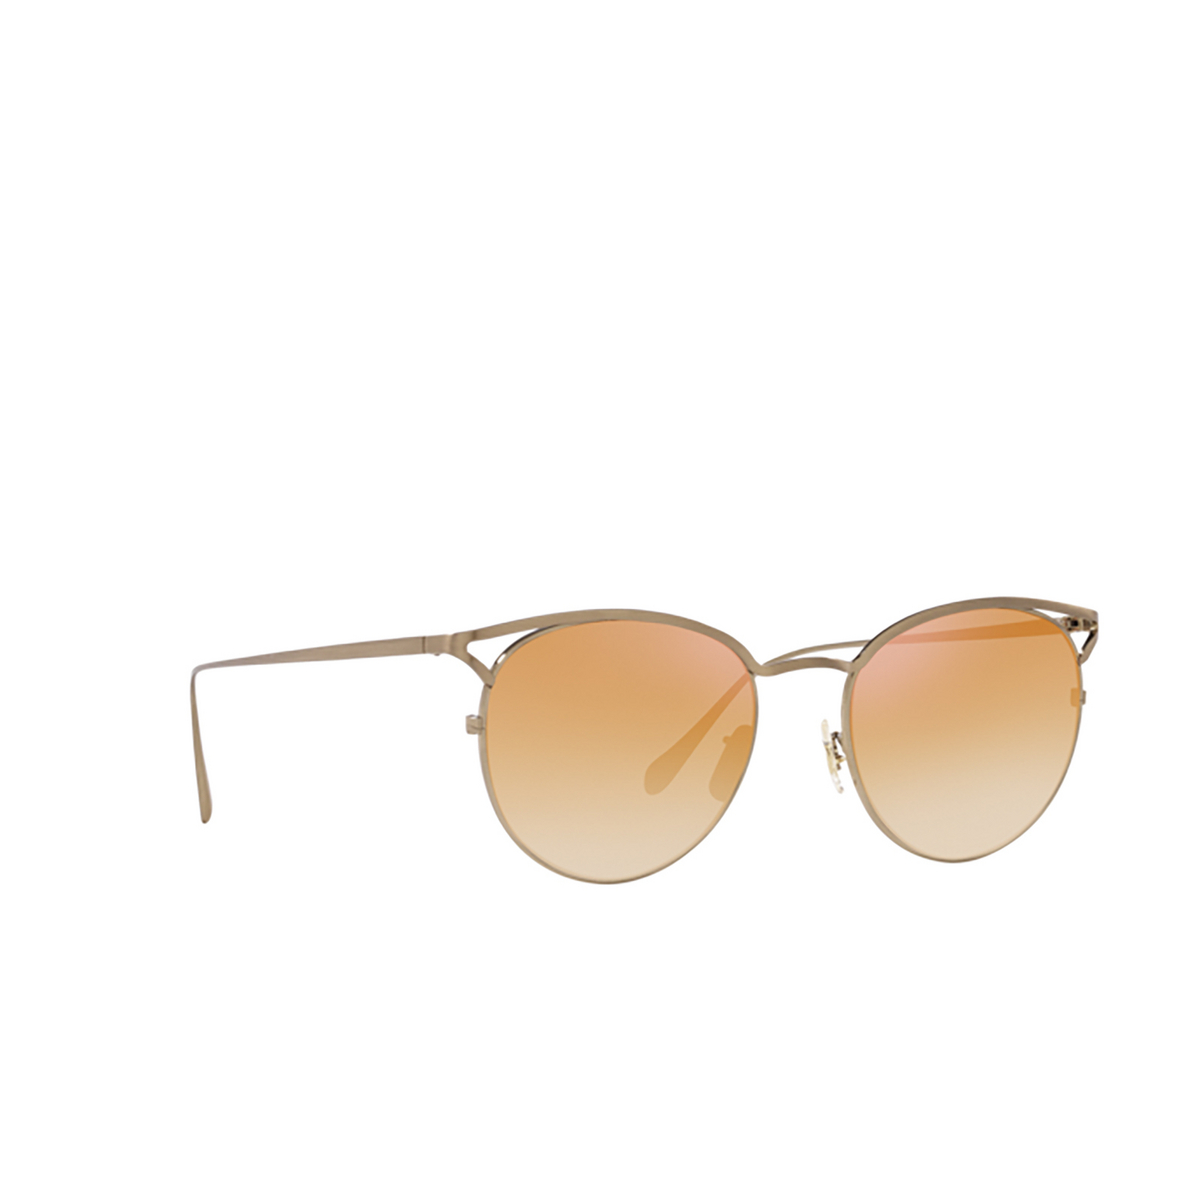 Oliver Peoples AVIARA Eyeglasses 5252 Brushed Gold - three-quarters view